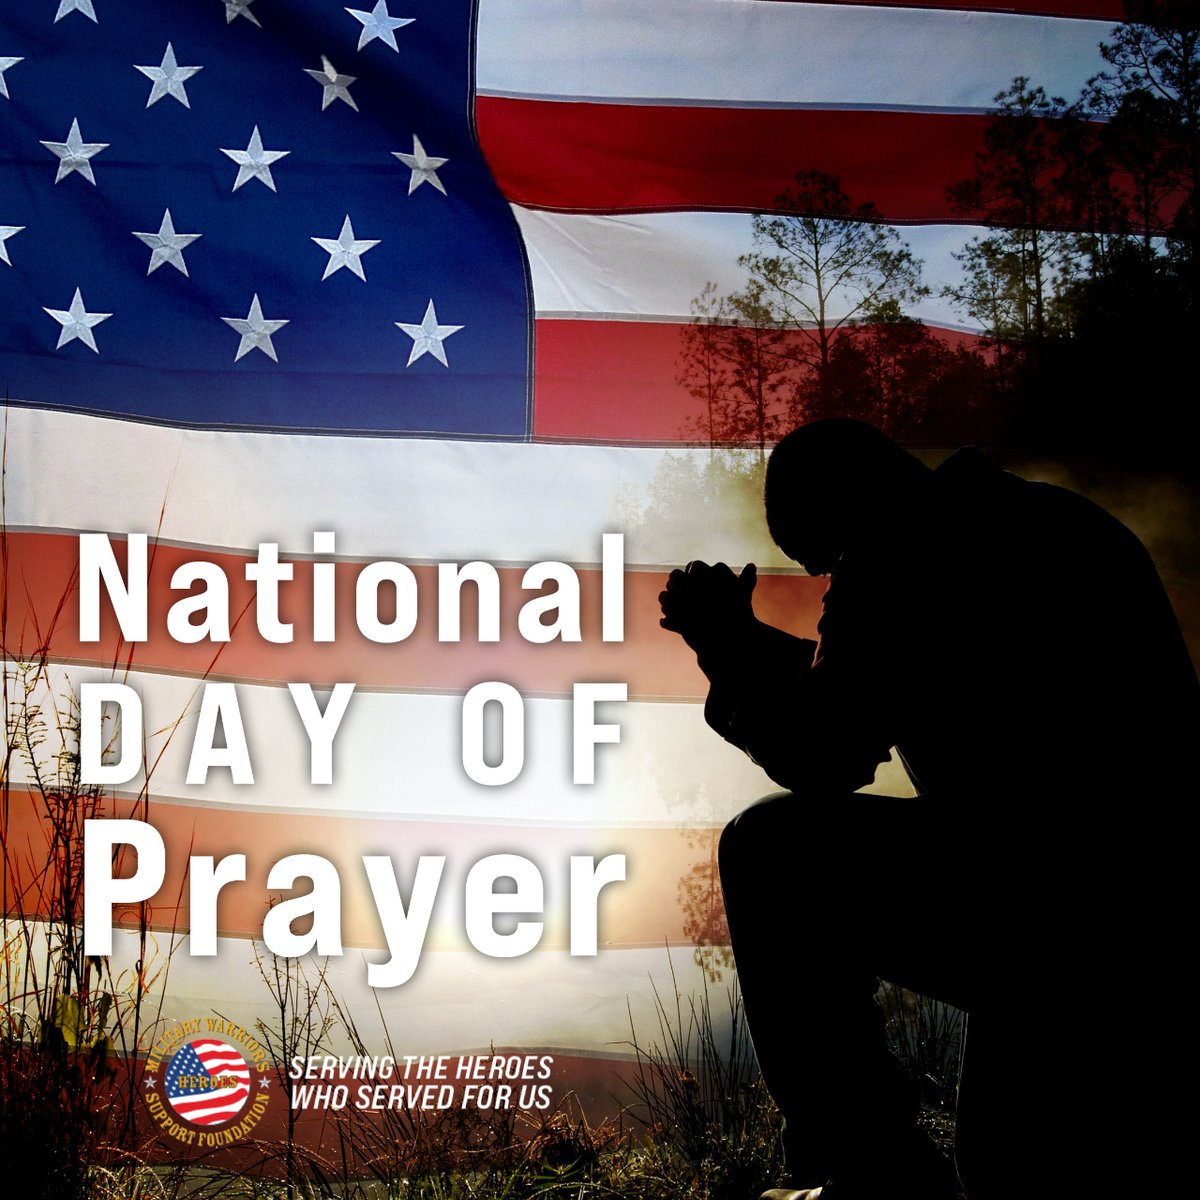 Join us on this National Day of Prayer as we pray not only for our communities and nation but also for those who serve our country with courage and dedication. Together, may our prayers bring comfort, strength, and blessings to all. #NationalDayOfPrayer 🙏